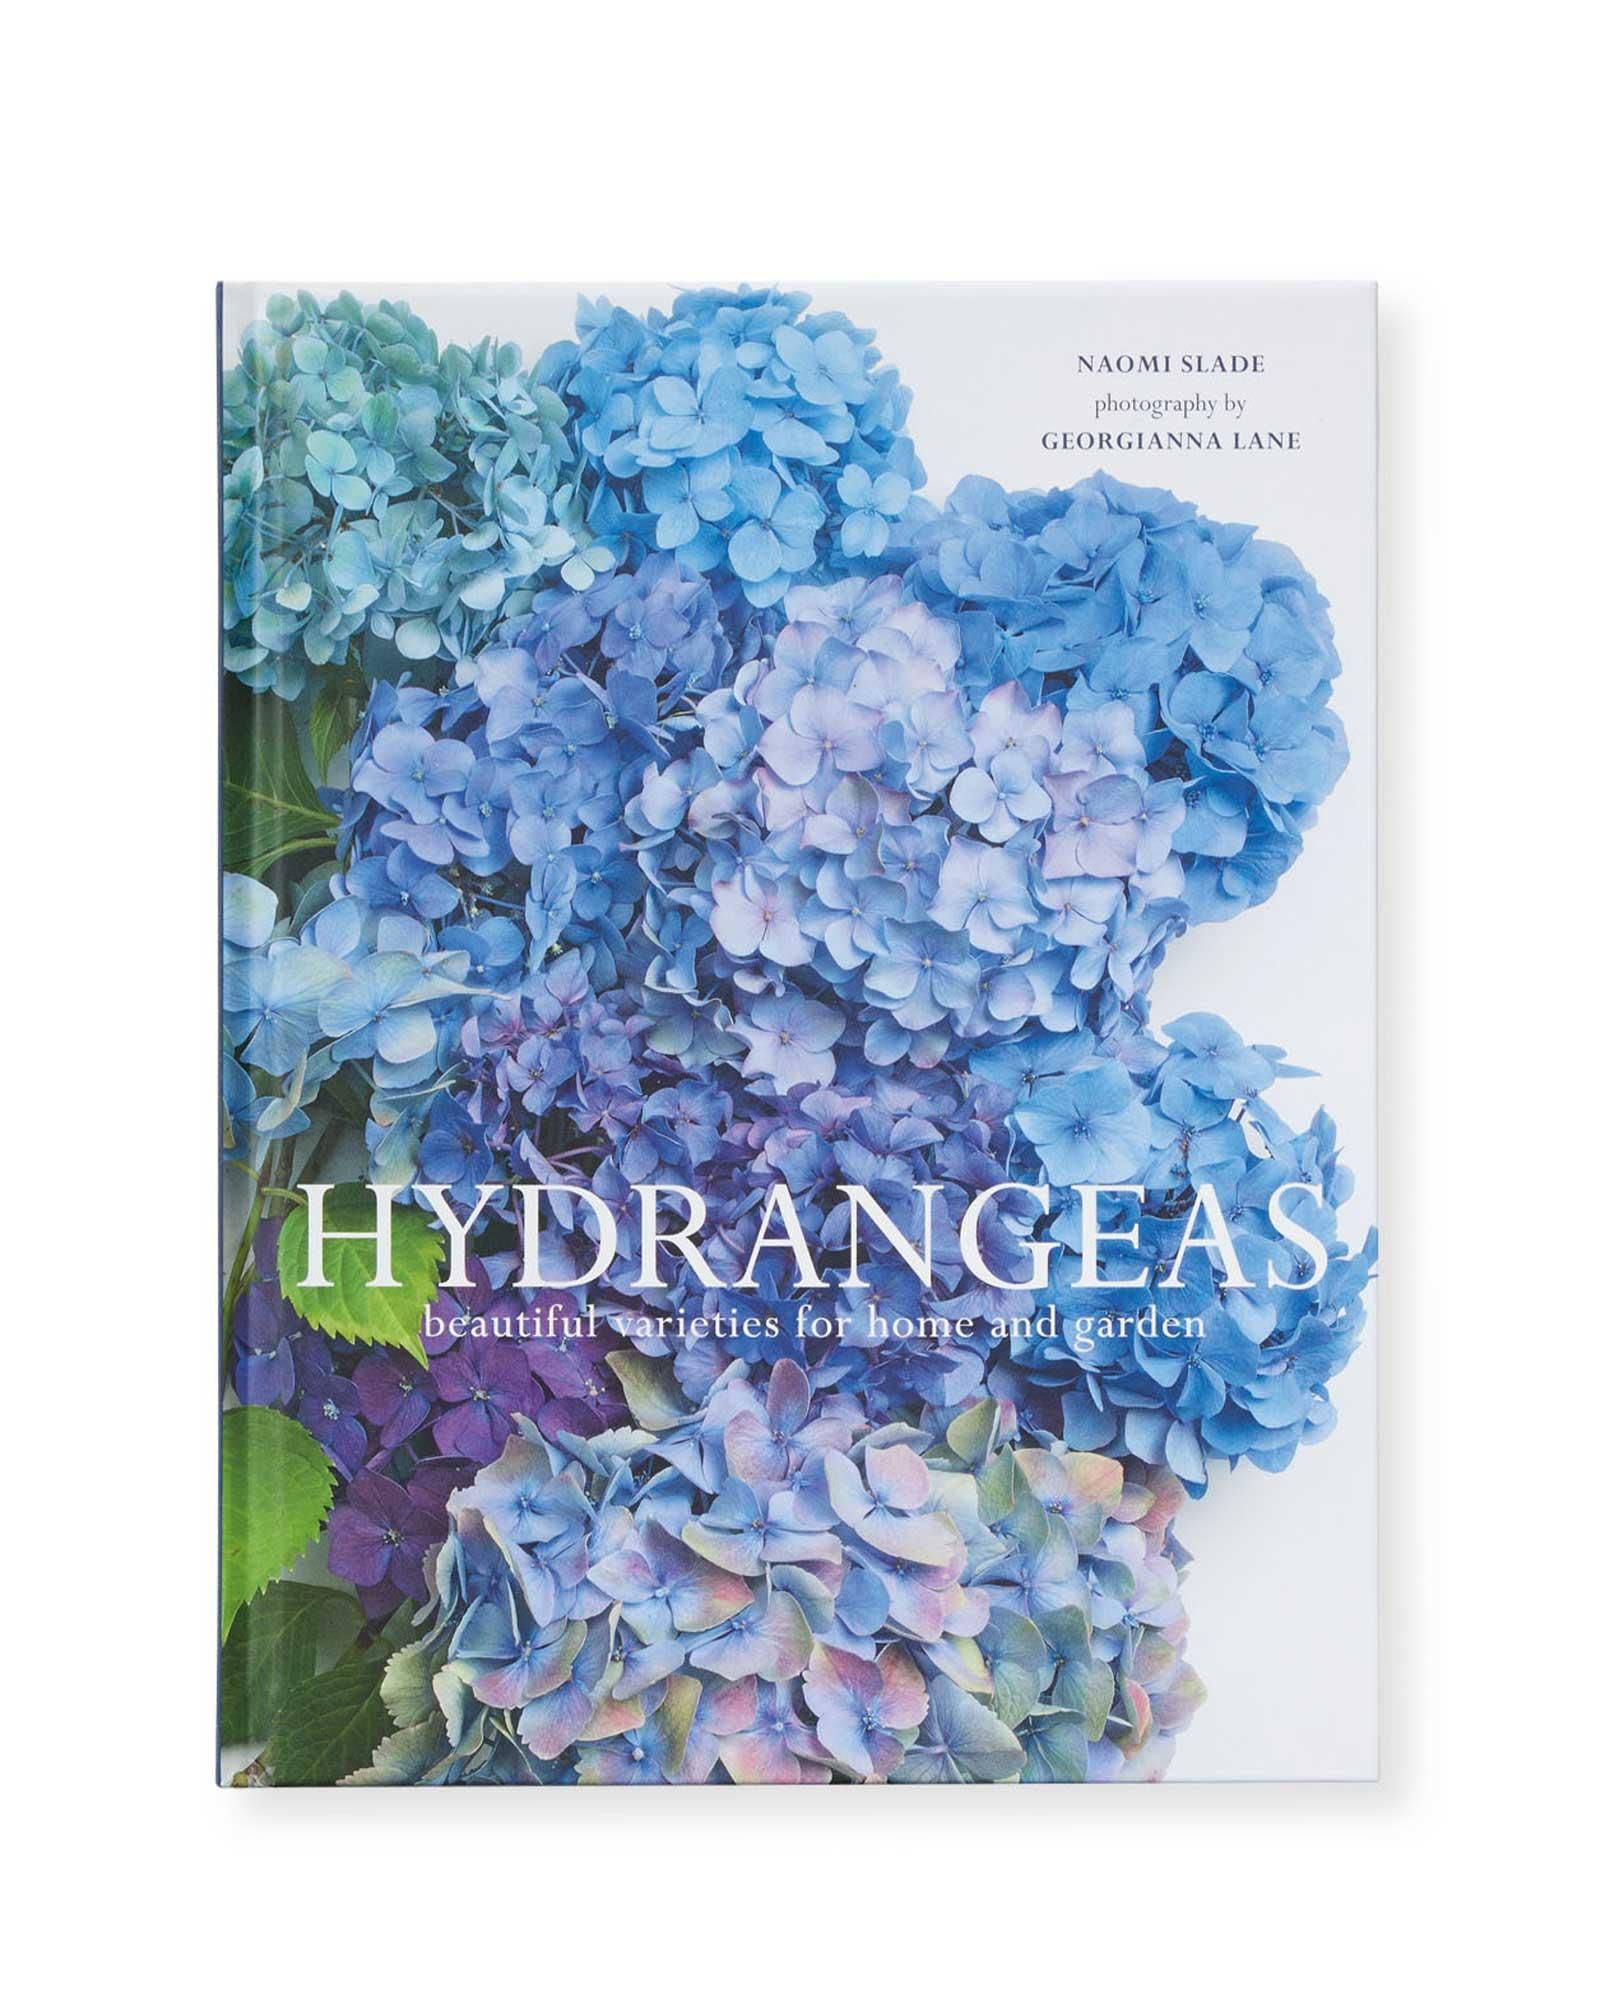 "Hydrangeas: Beautiful Varieties for Home and Garden" by Naomi Slade | Serena and Lily